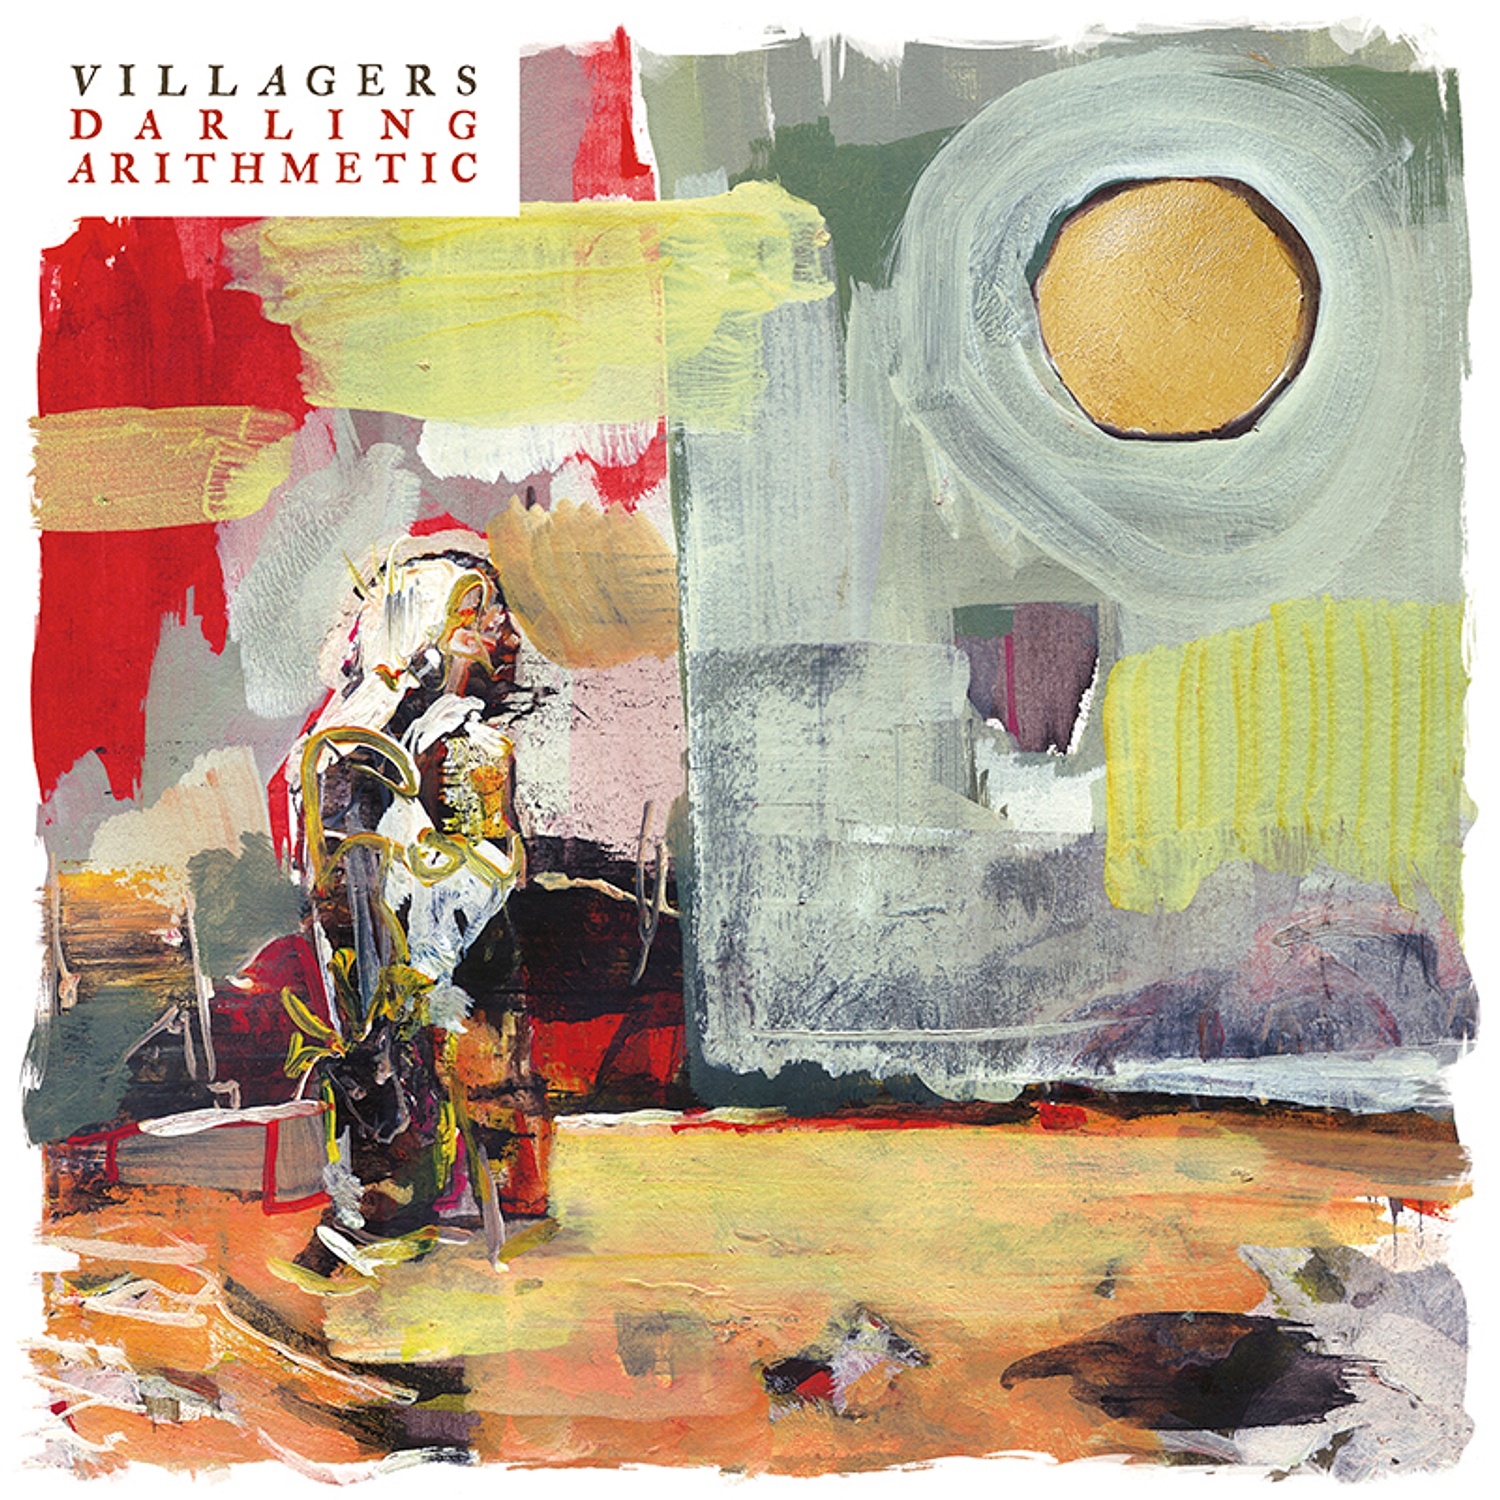 Villagers announces new album, ‘Darling Arithmetic’, shares ‘Courage’ video